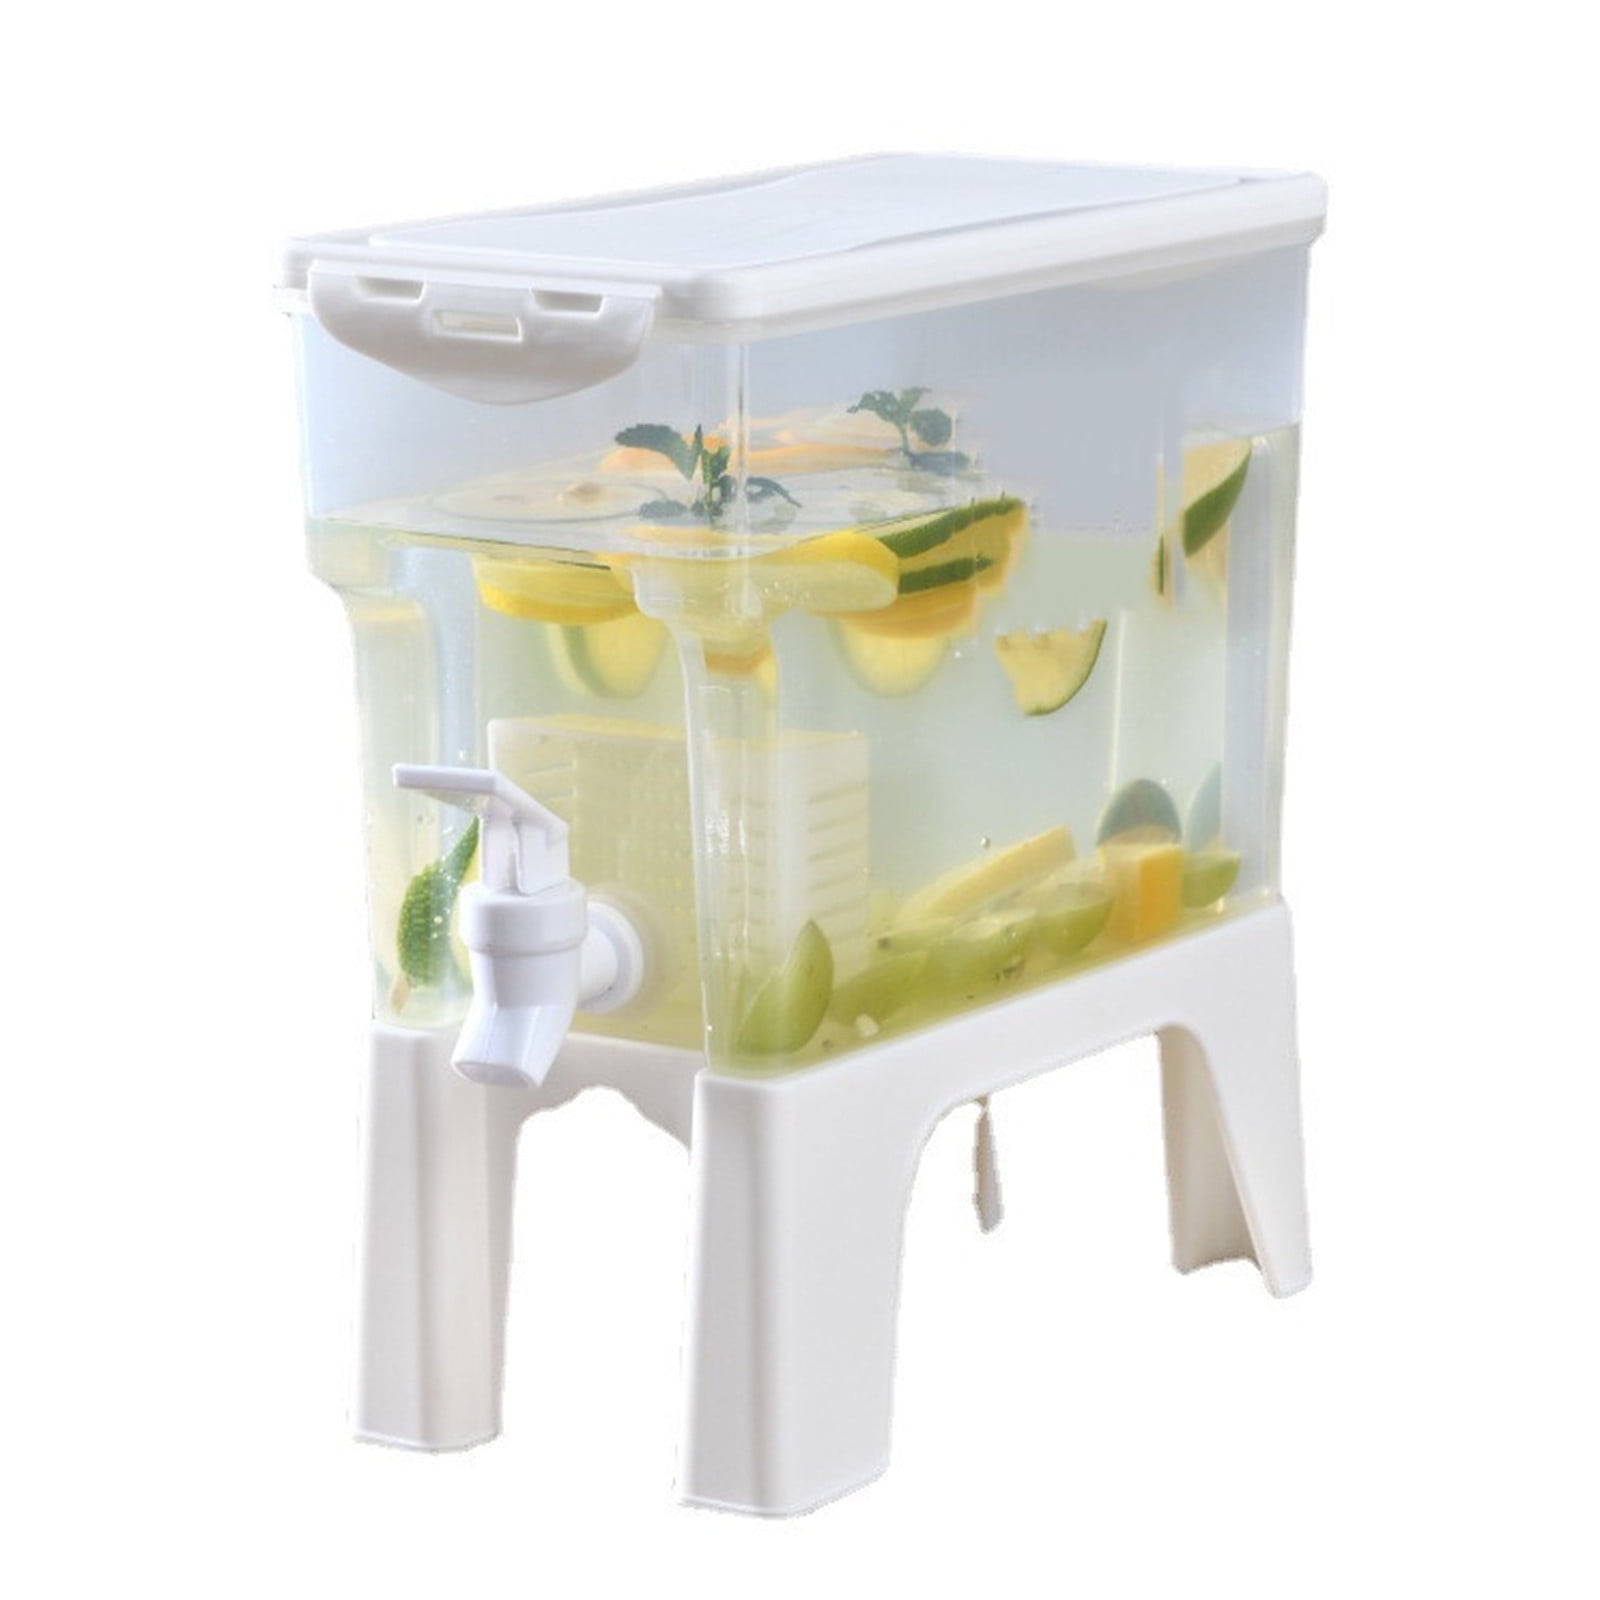 Refrigerator Glass Water Dispenser, 1 Gallon, Water Dispenser for Picnic, Pool Party and Social Activities Latitude Run